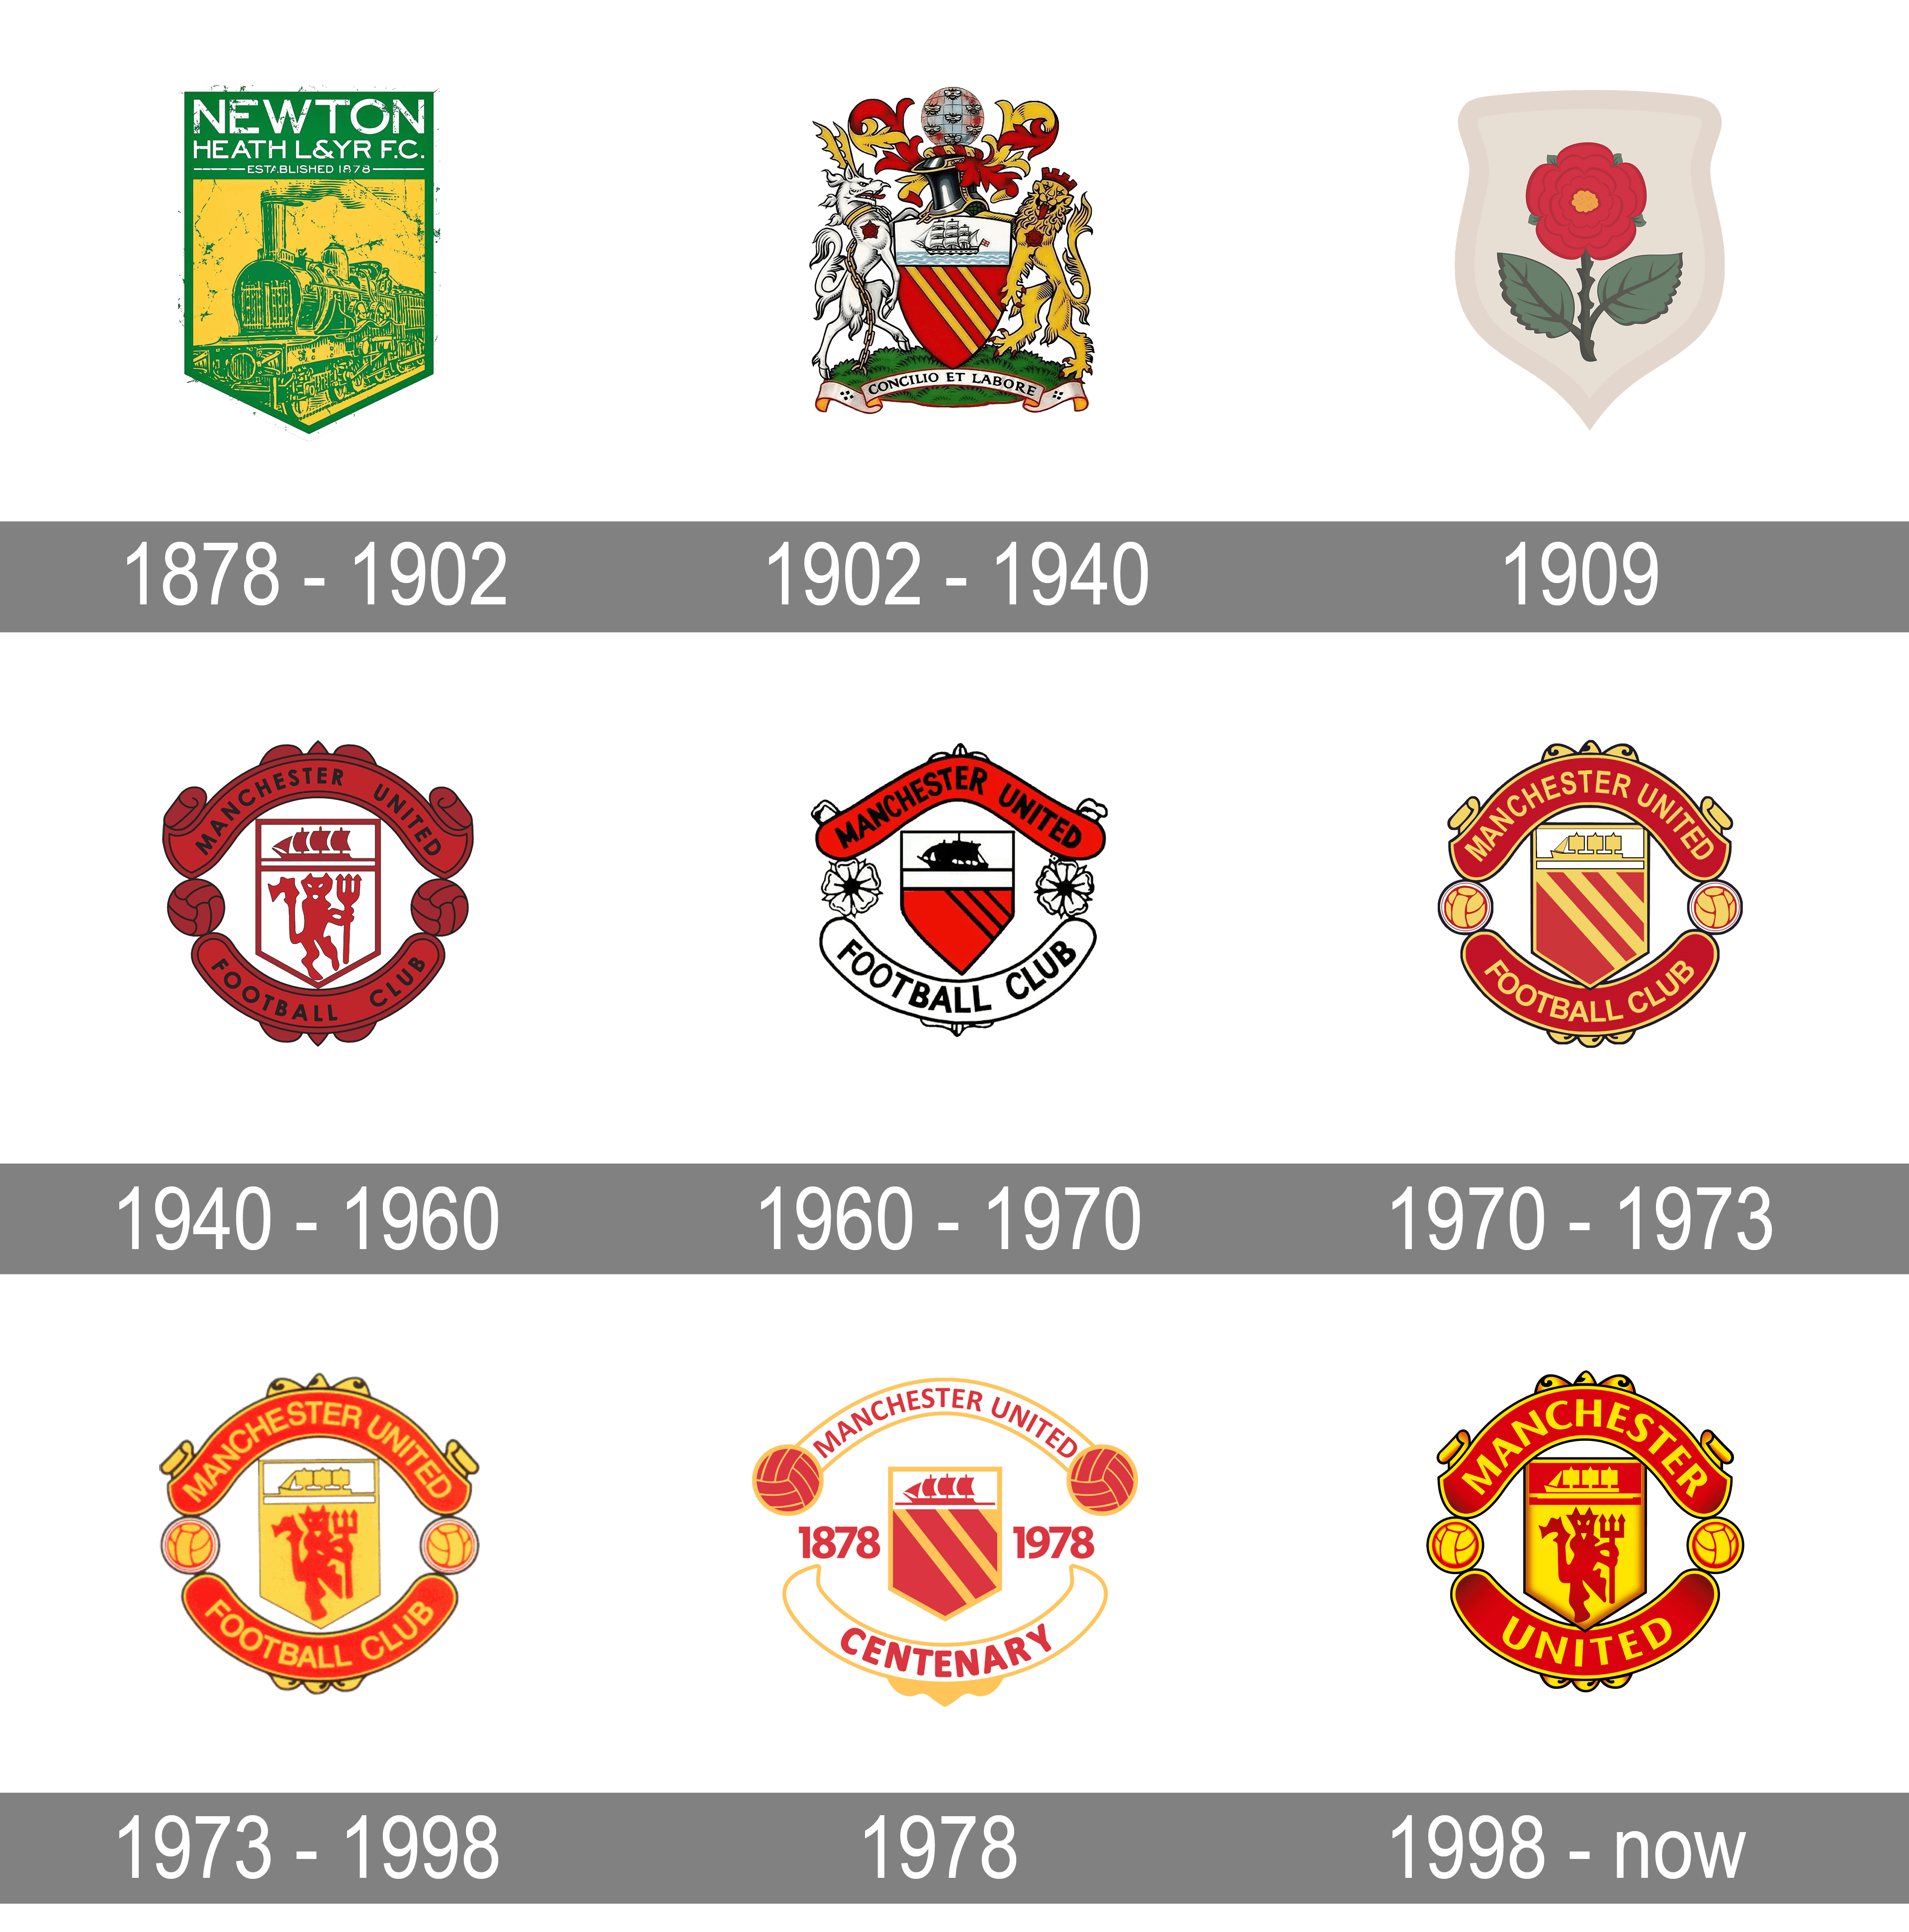 Manchester United badge shown from 1940 to now, with minor tweaks to colour and shield.